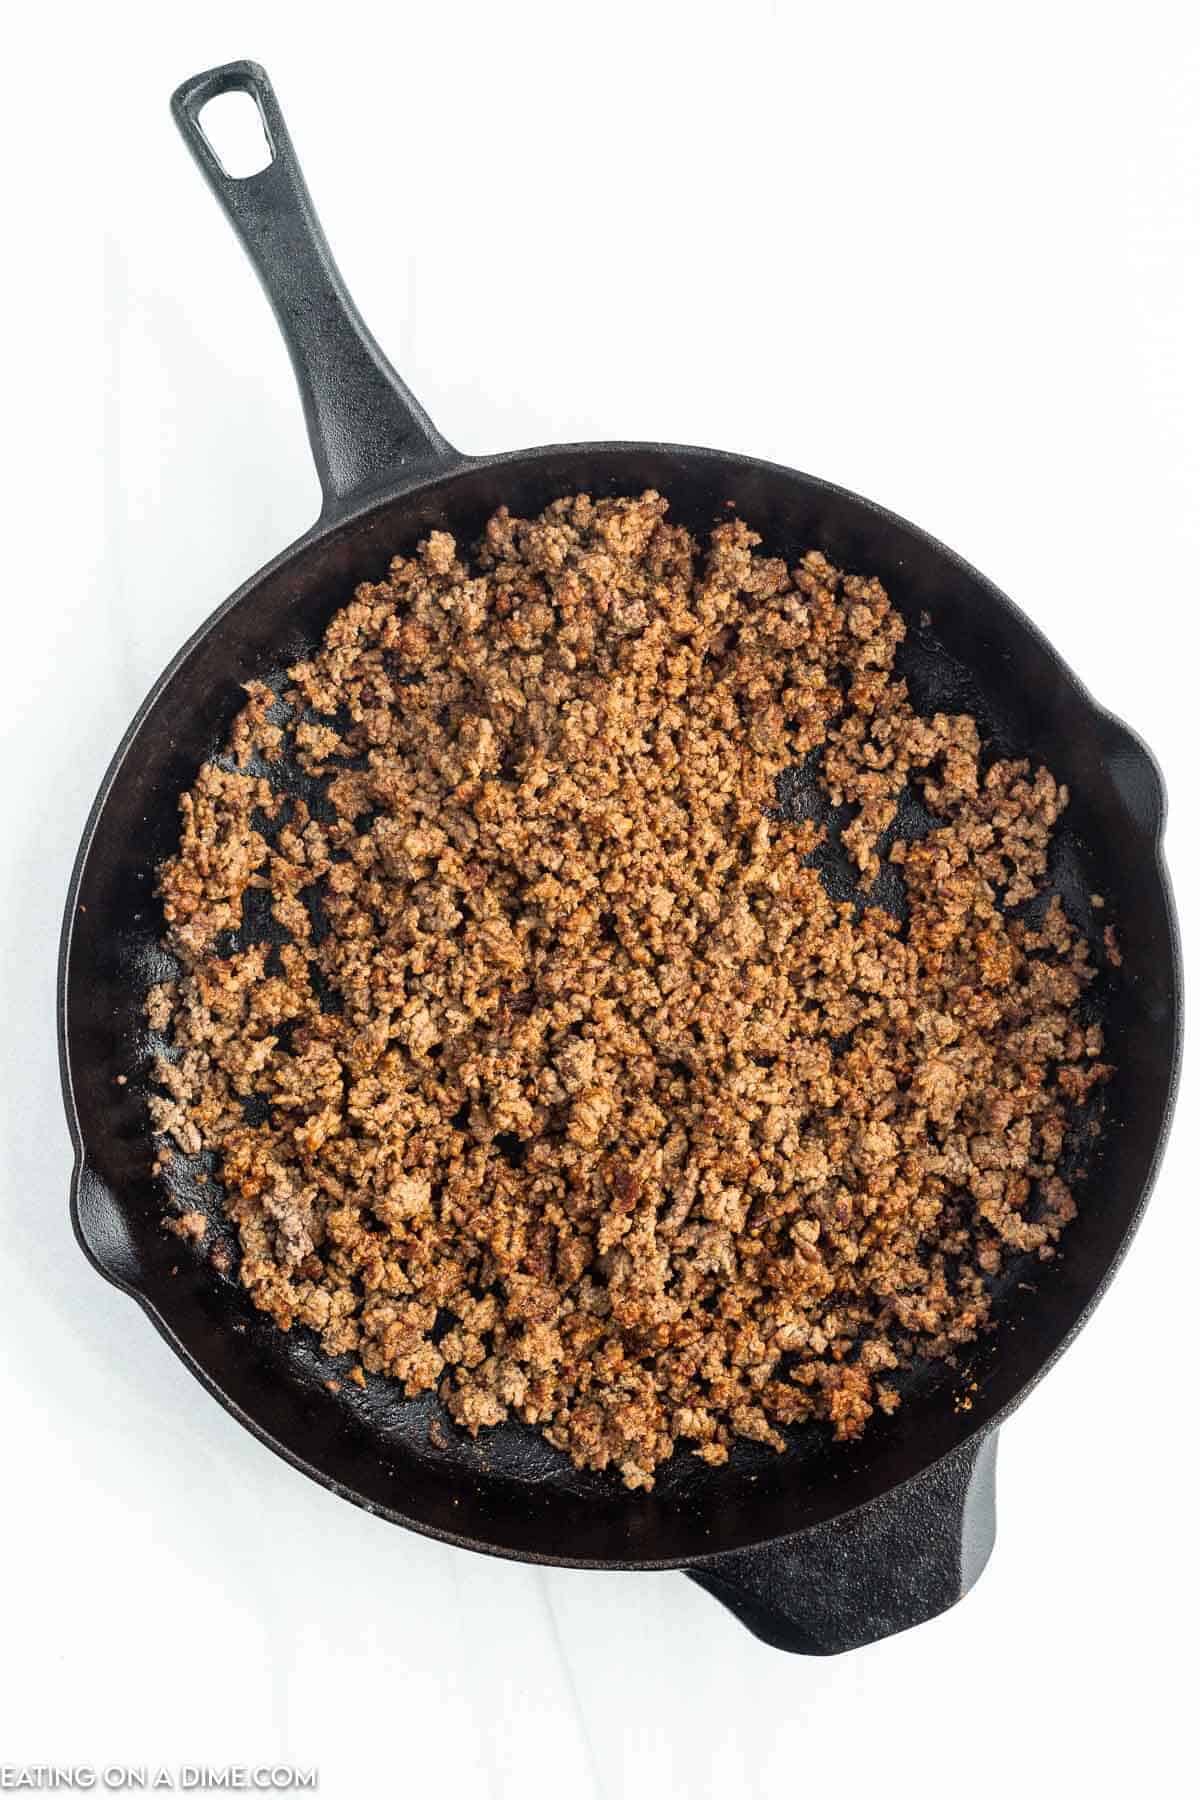 Cooking the ground beef in a skillet